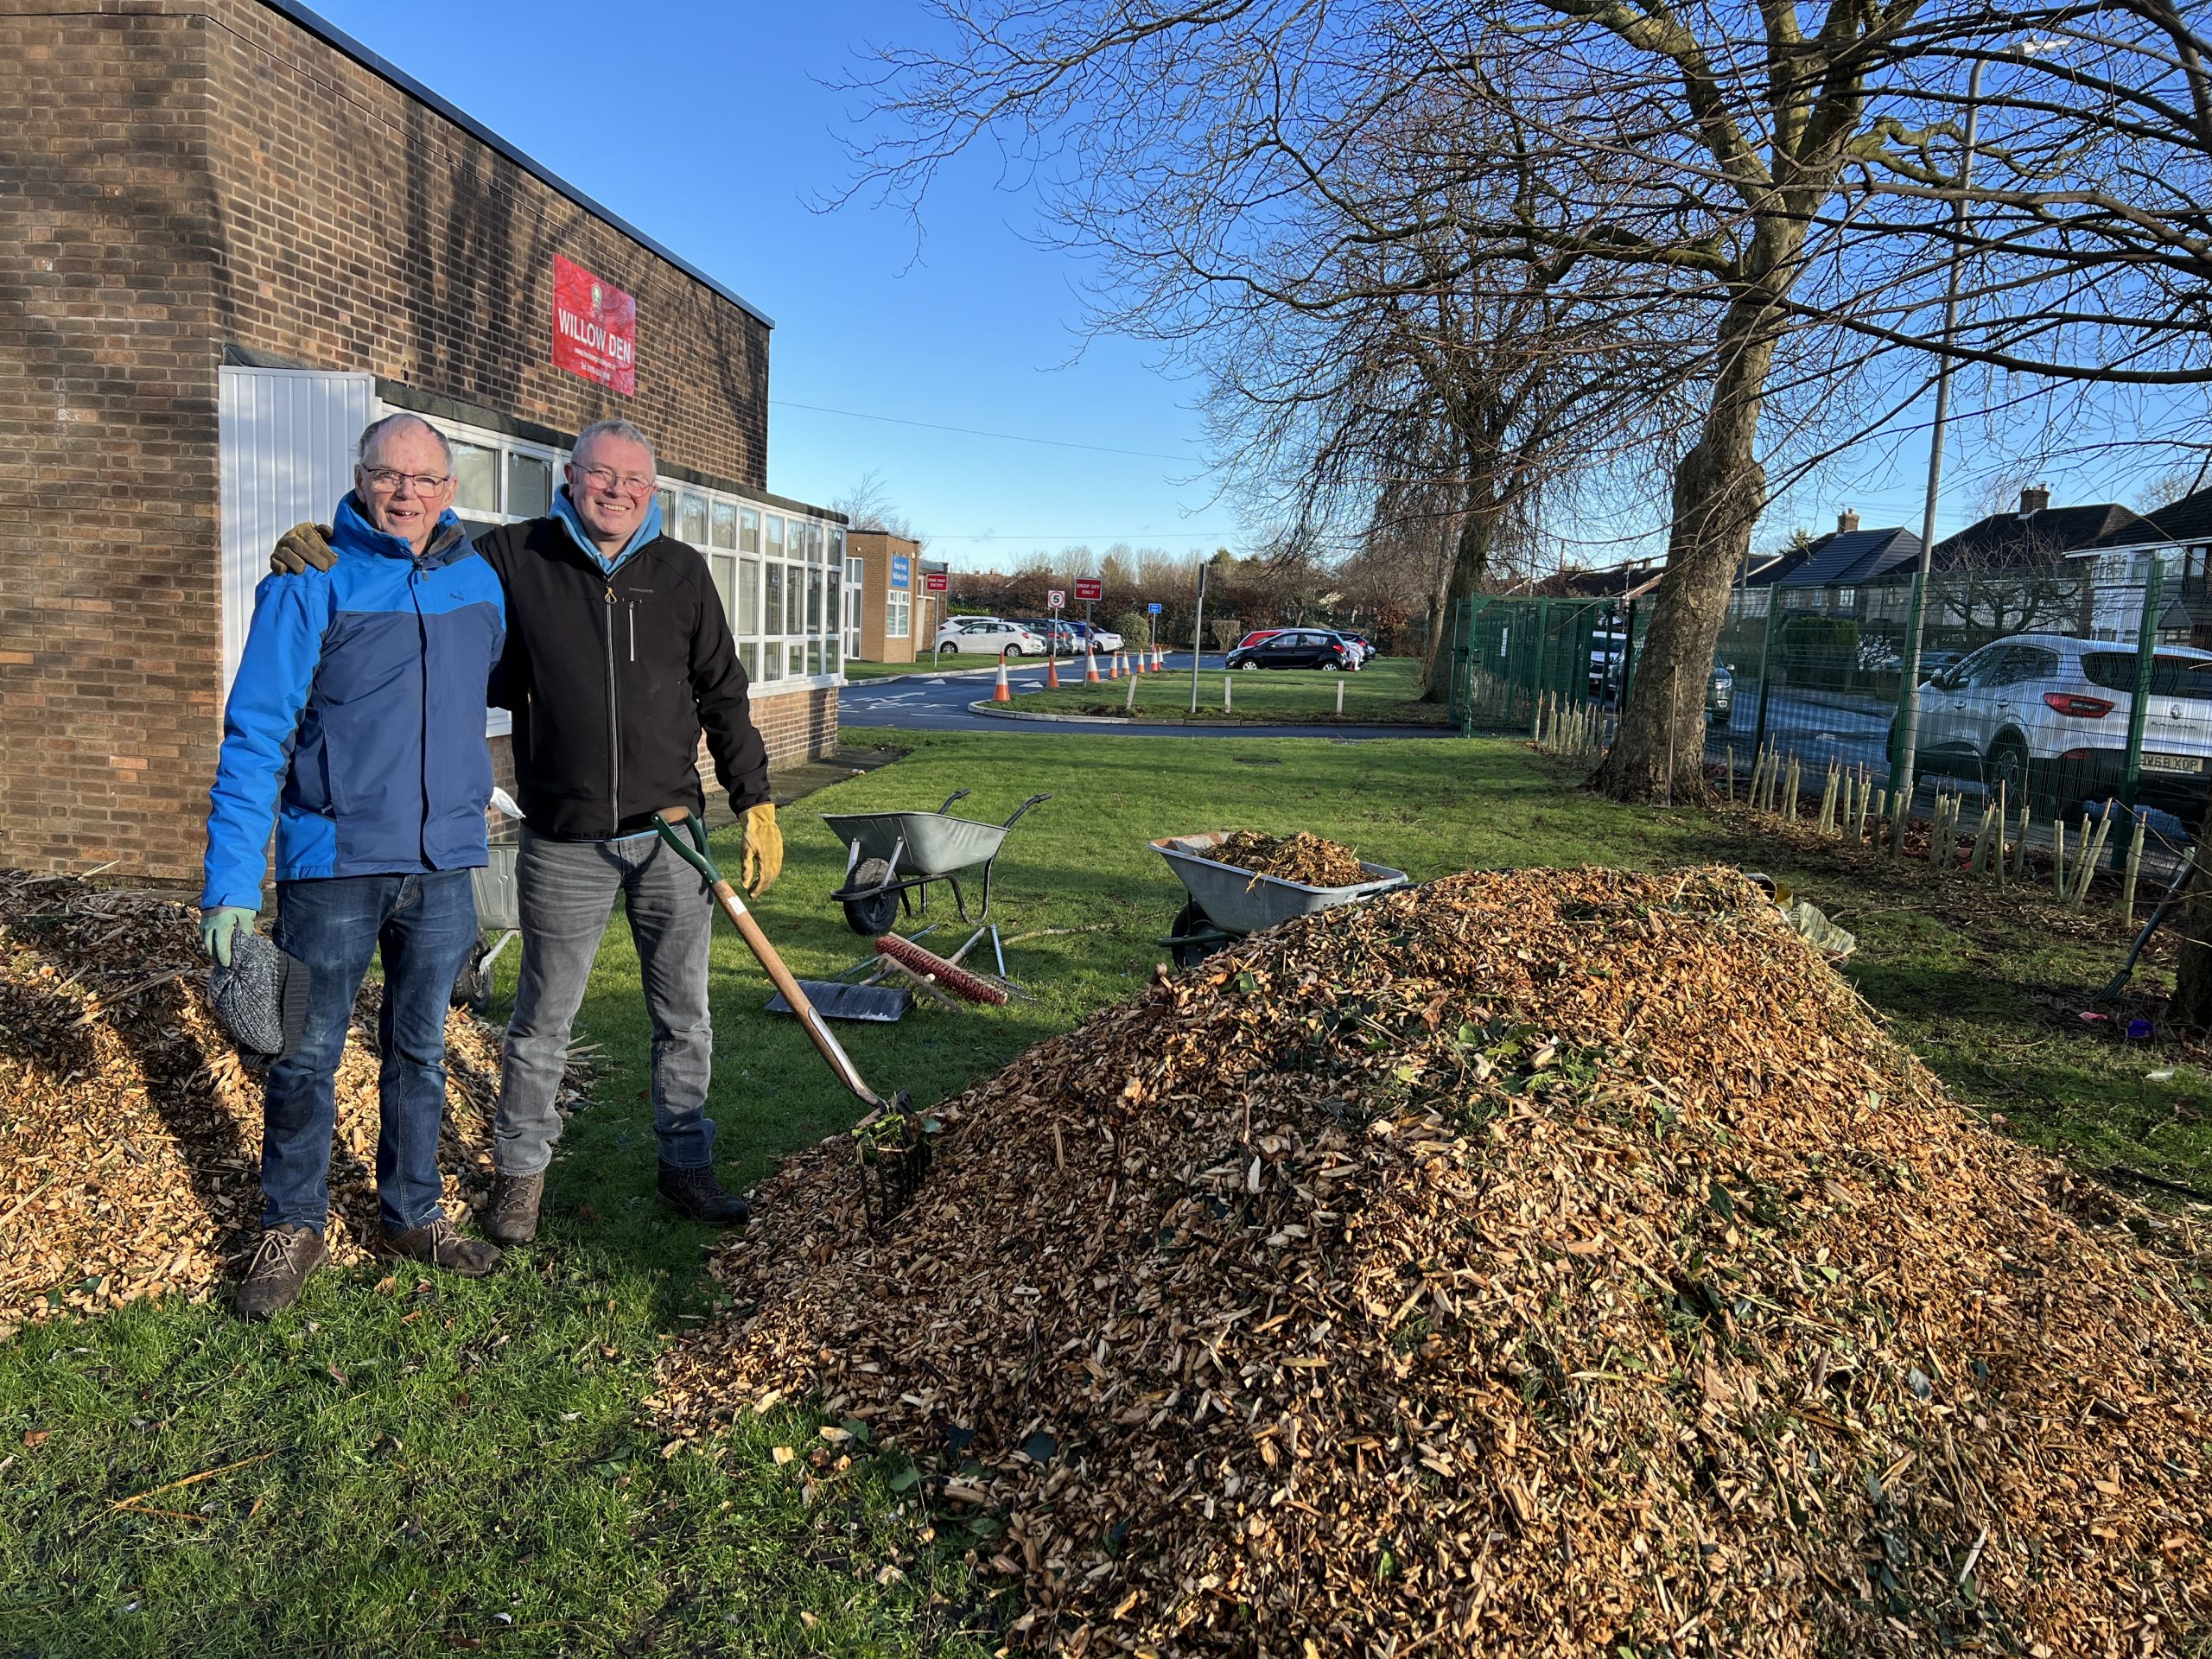 John and Paul before our one-hour for Maghull work last Monday at Hudson Primary School